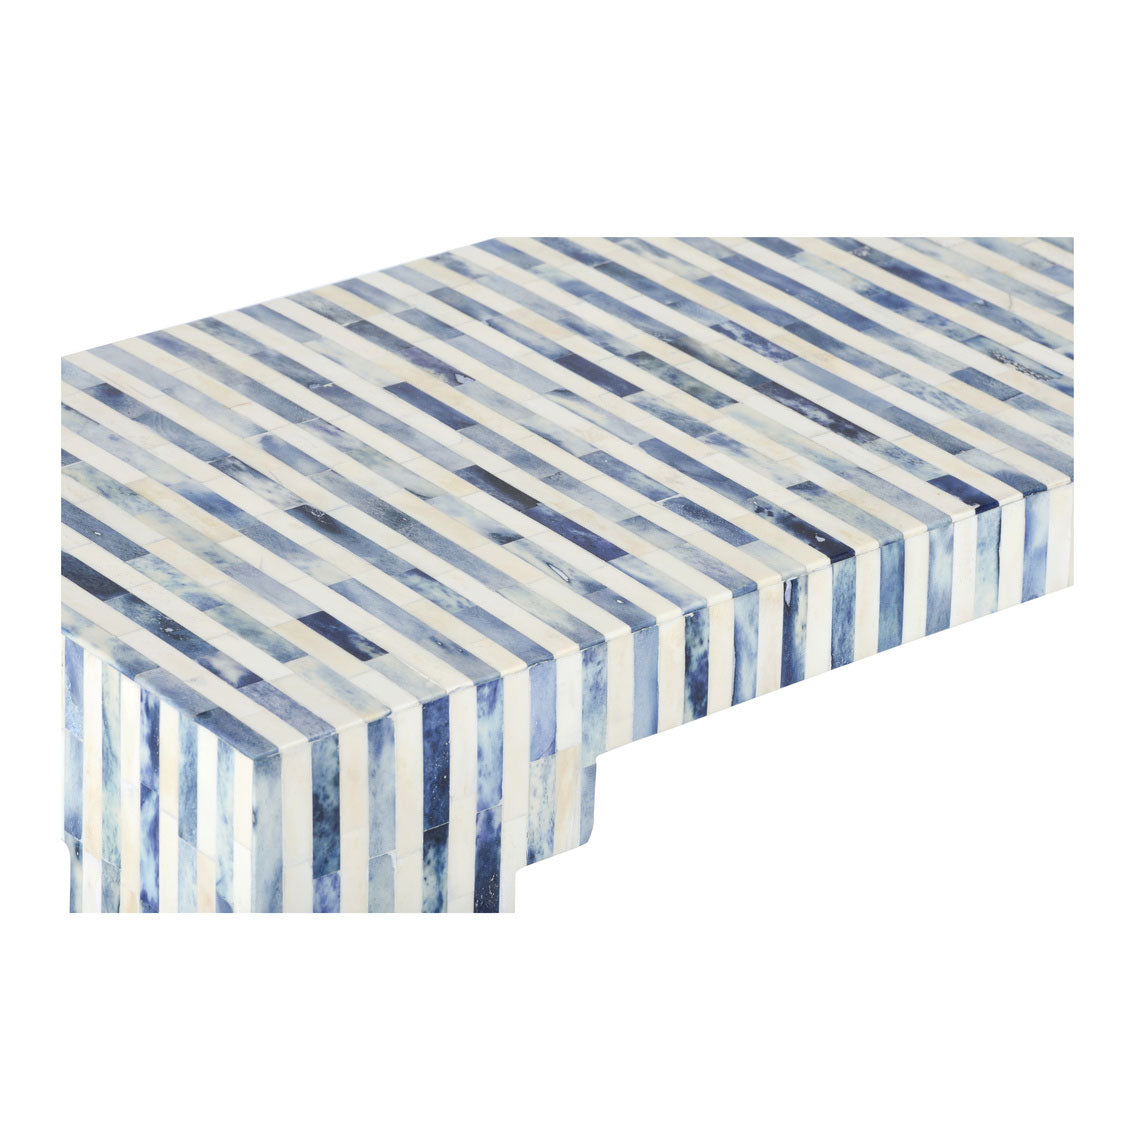 Chelsea House Bone Inlay Console - Blue